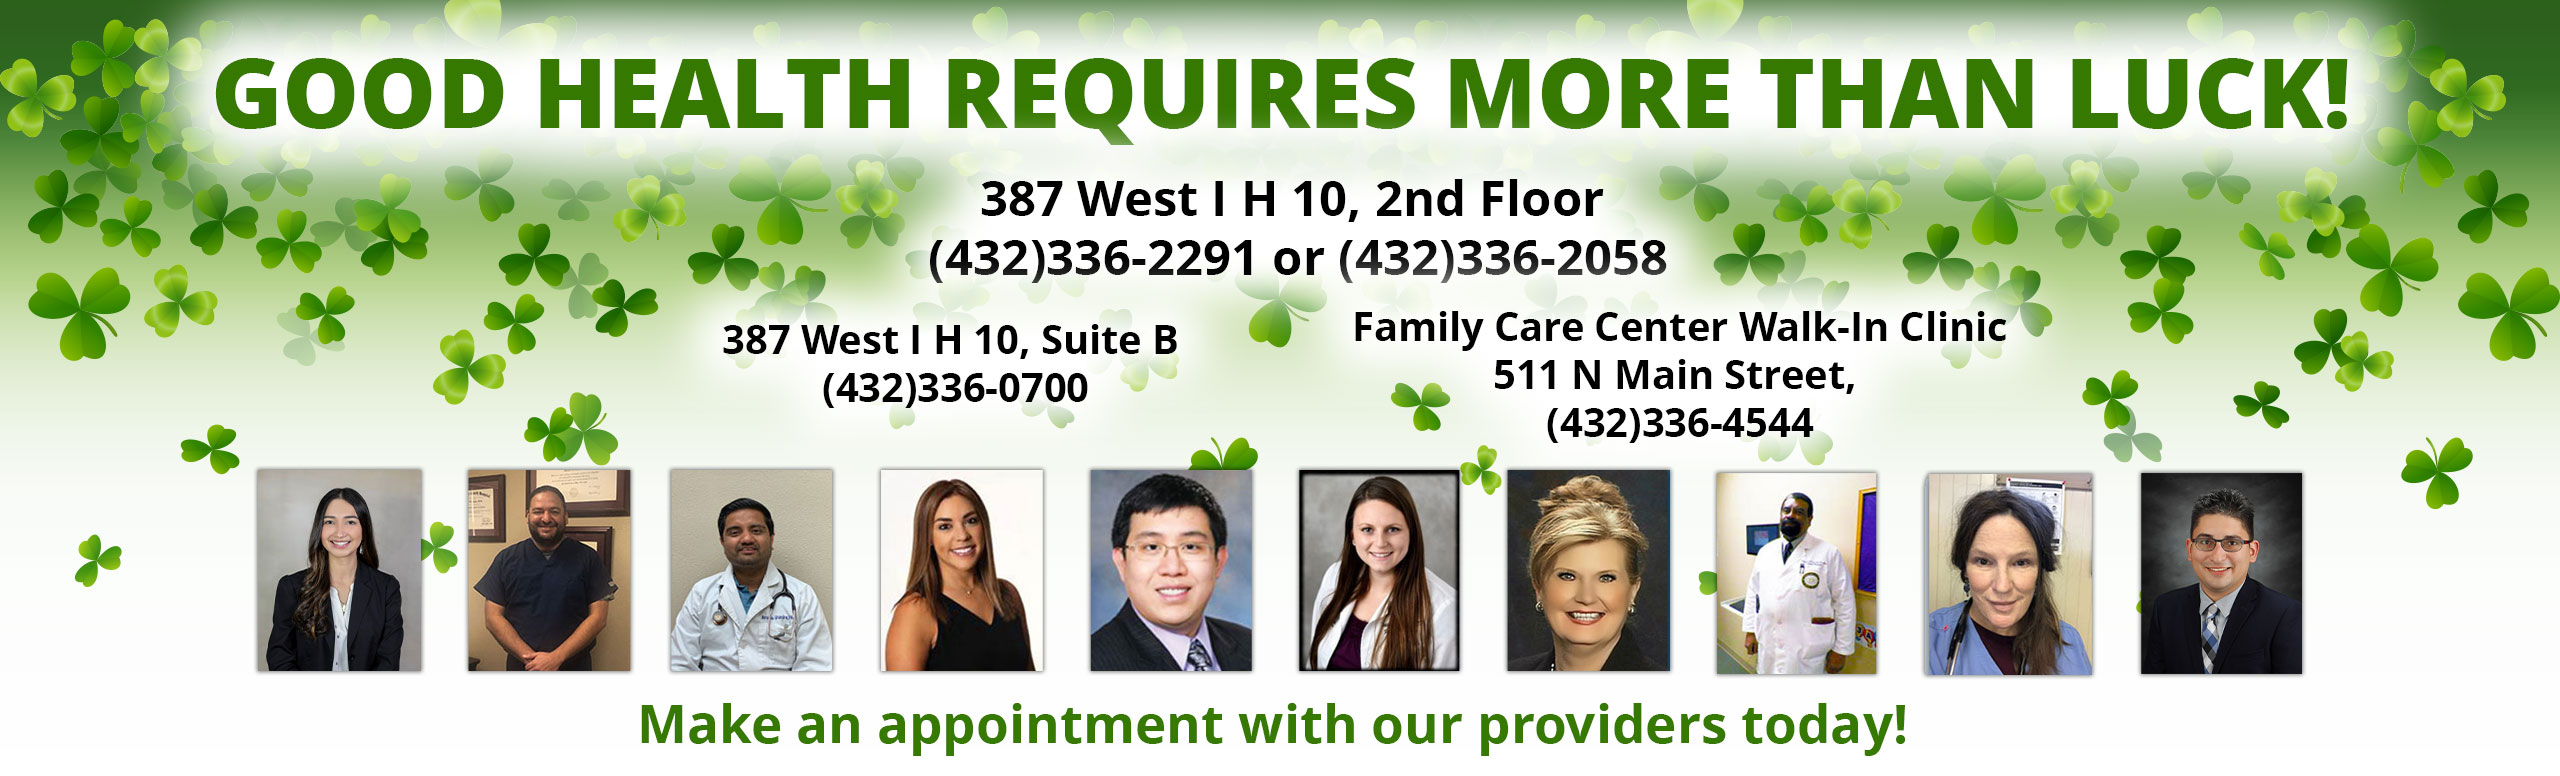 Banner picture of our Physicians (Males and Females). Banner says:
Good Health Requires more than luck!
387 West I H 10, 2nd Floor Fort Stockton, Texas 79735

Office Phone Number (432)336-2291 Phone Number (432)336-2058

 

387 West I H 10, Suite B Fort Stockton, Texas 79735 Office Phone Number (432)336-0700

 

Family Care Center Walk-In Clinic

511 N Main Street, Fort Stockton, Texas 79735

Office Phone Number (432)336-4544